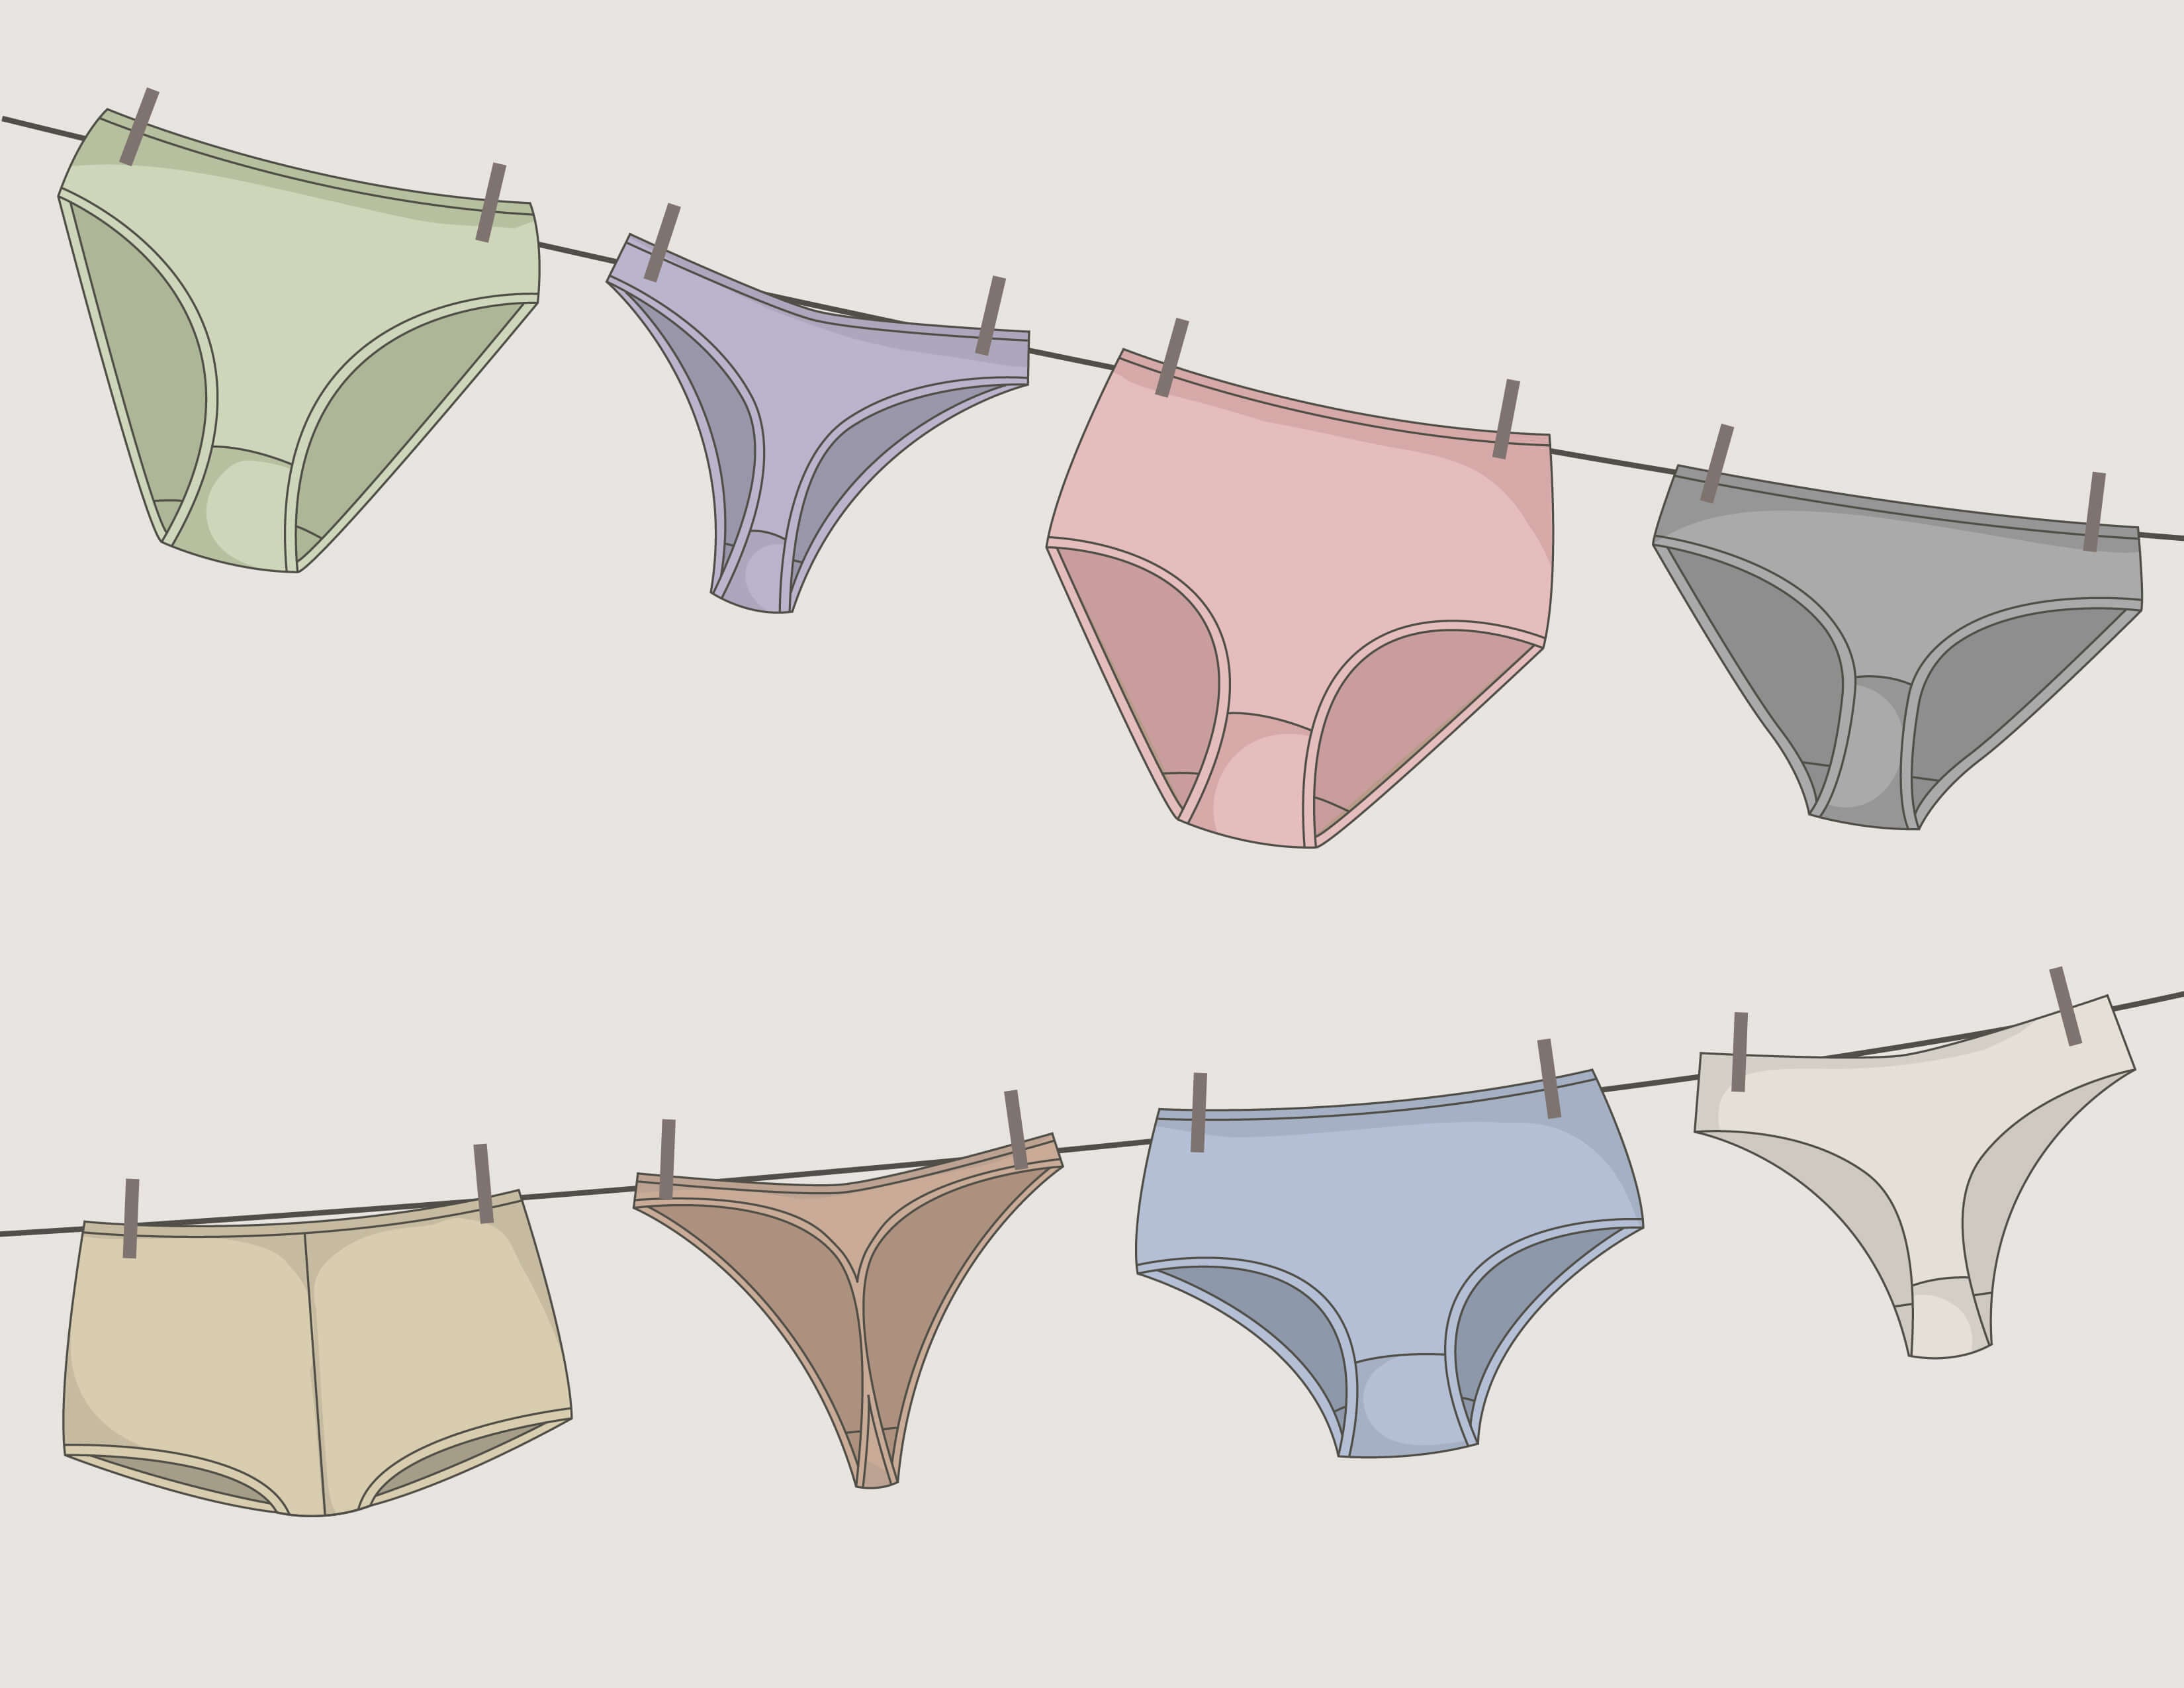 Styles and Types of Women's Underwear: How to Choose The Best For You – Q  for Quinn™